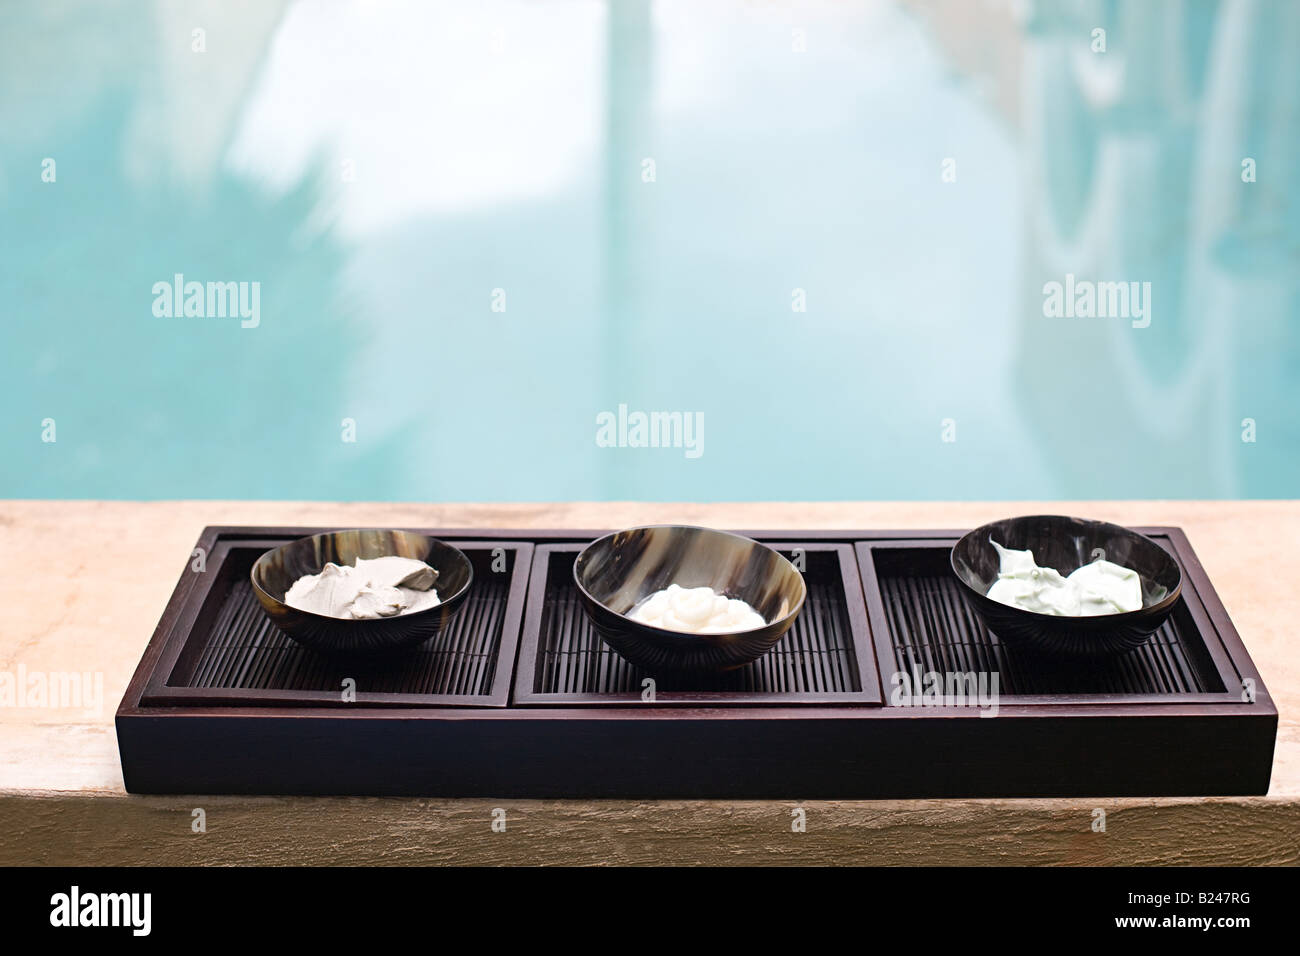 Bowls by swimming pool Stock Photo